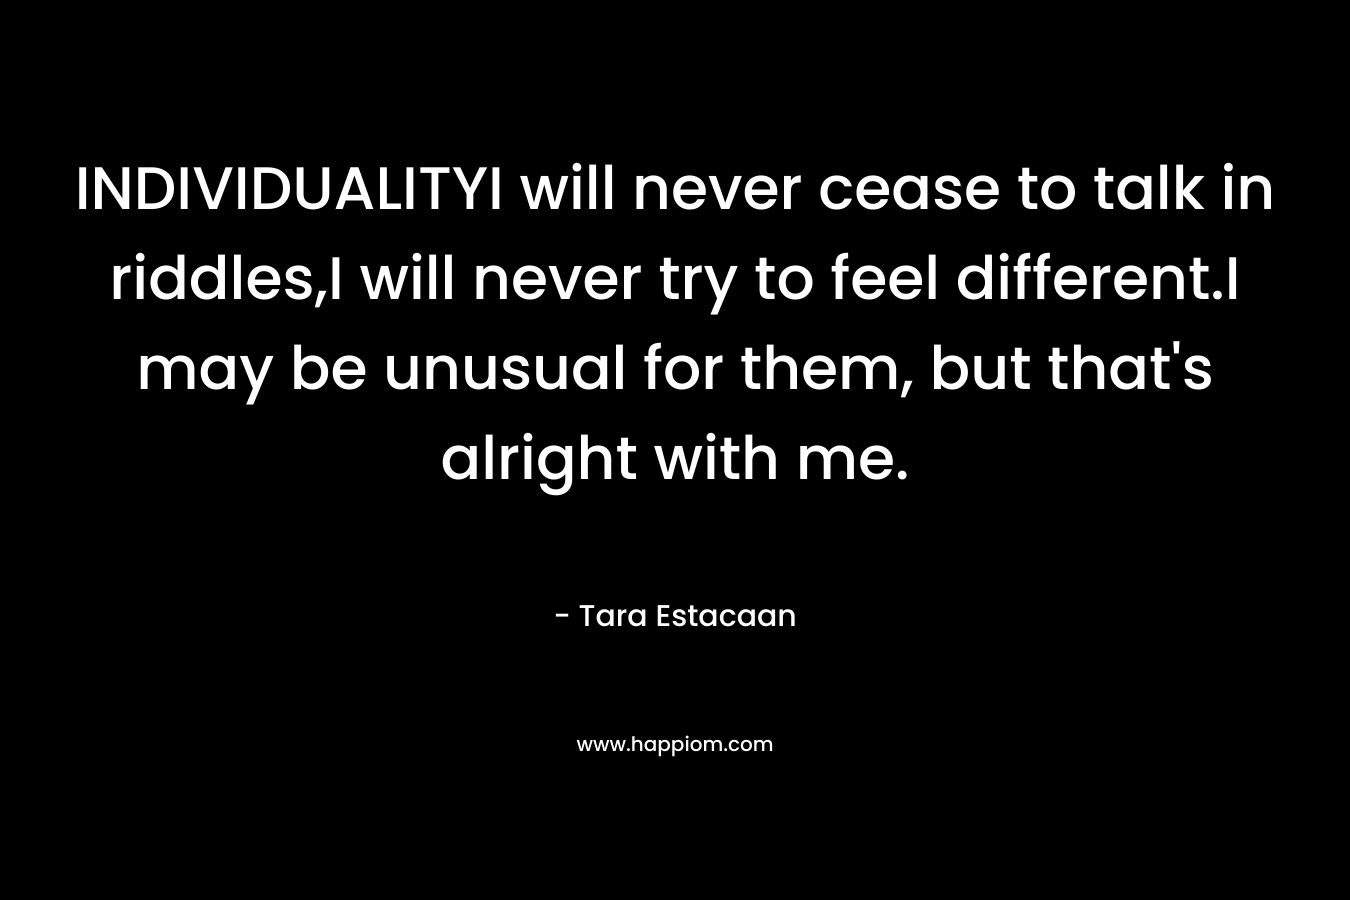 INDIVIDUALITYI will never cease to talk in riddles,I will never try to feel different.I may be unusual for them, but that’s alright with me. – Tara Estacaan